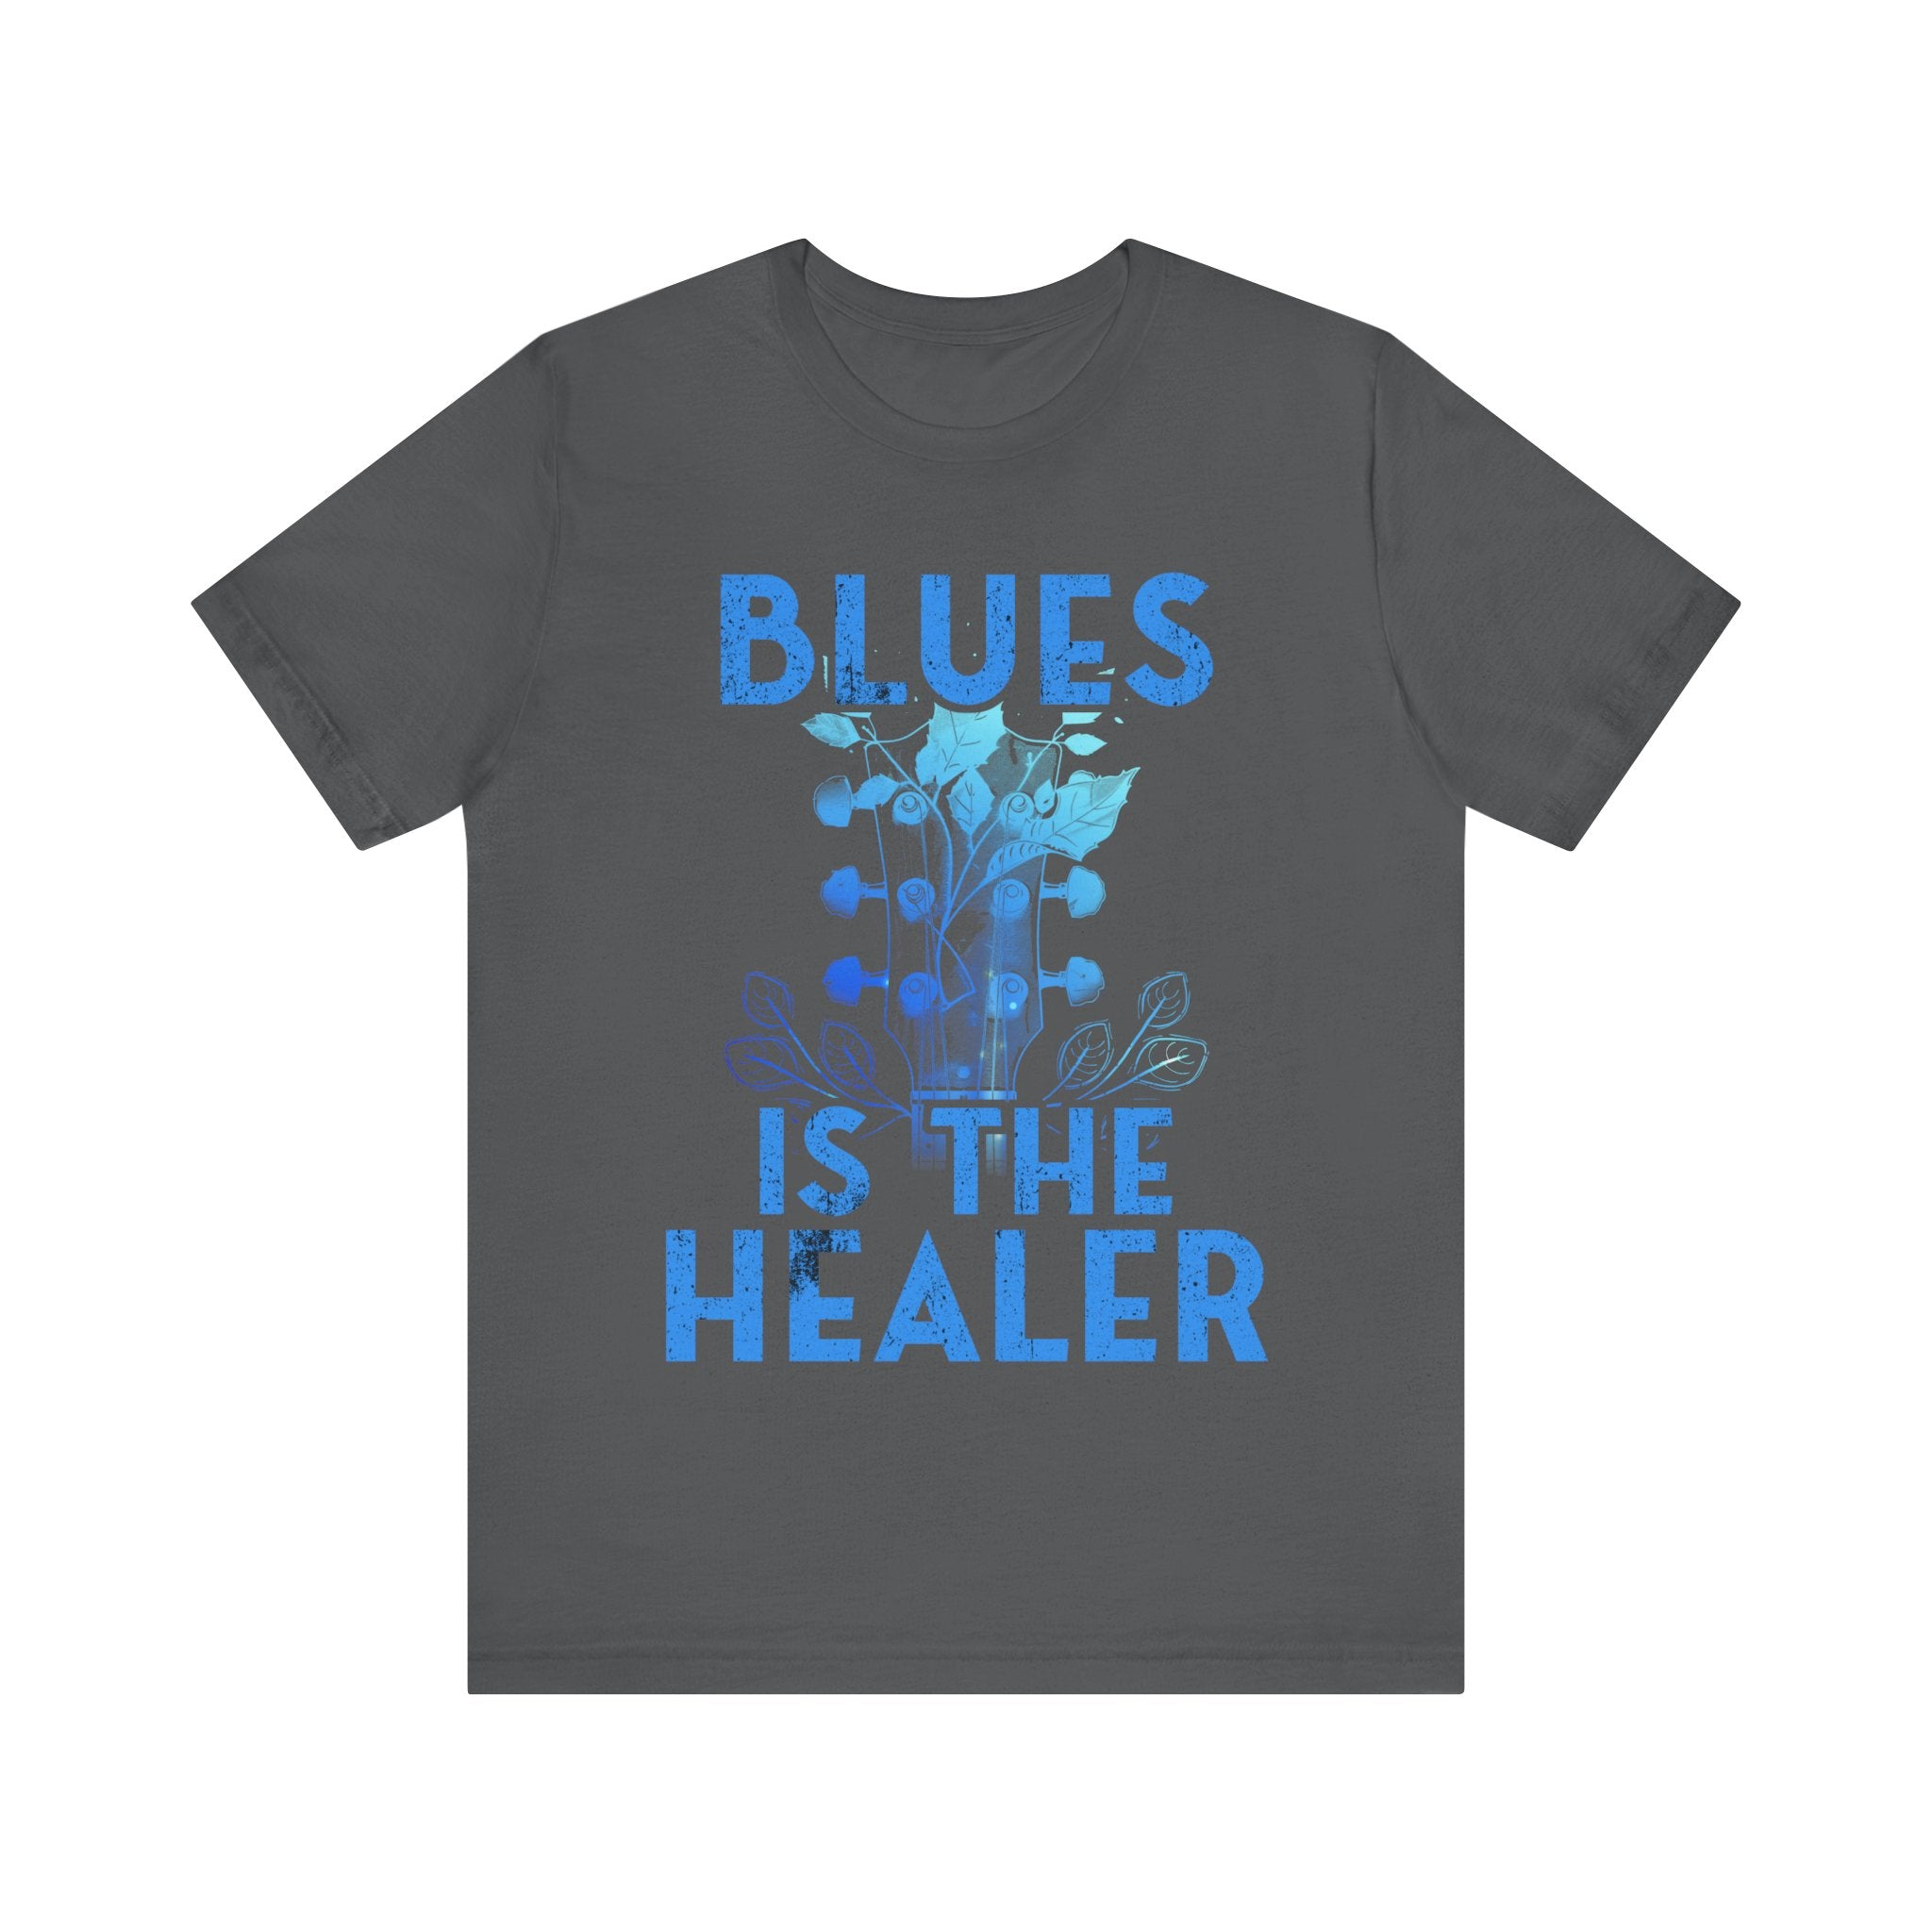 Blues is THE HEALER